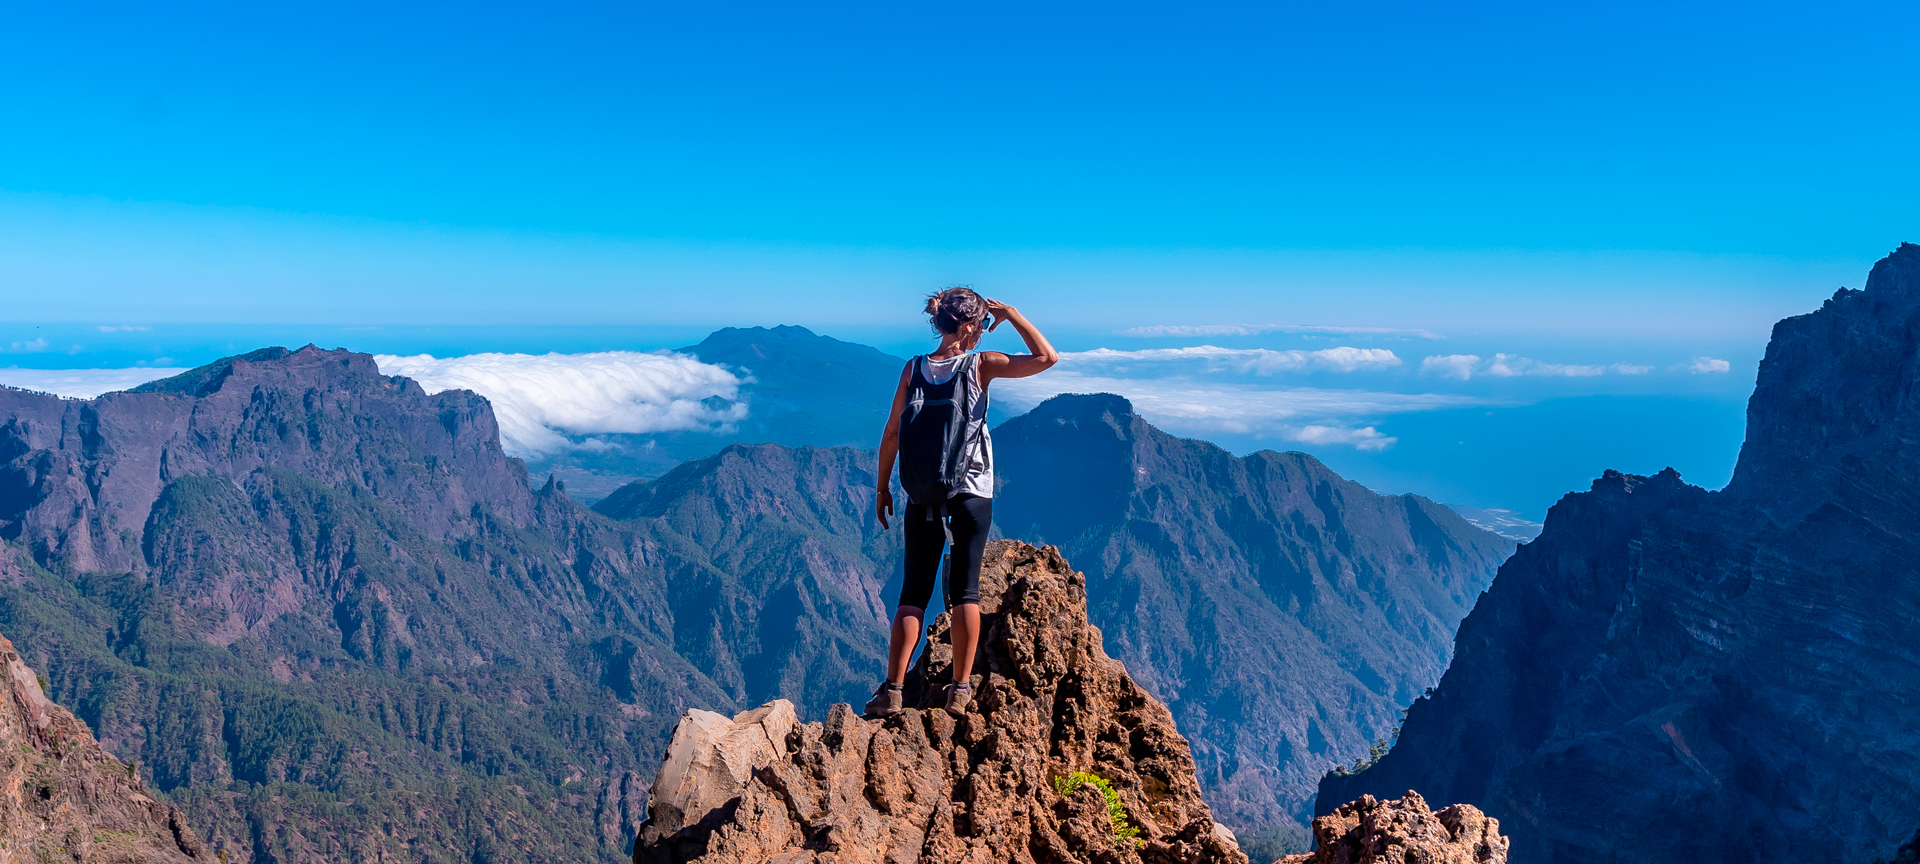 Tourist looking at the view in the Caldera de Taburiente Nature Reserve on La Palma, Canary Islands